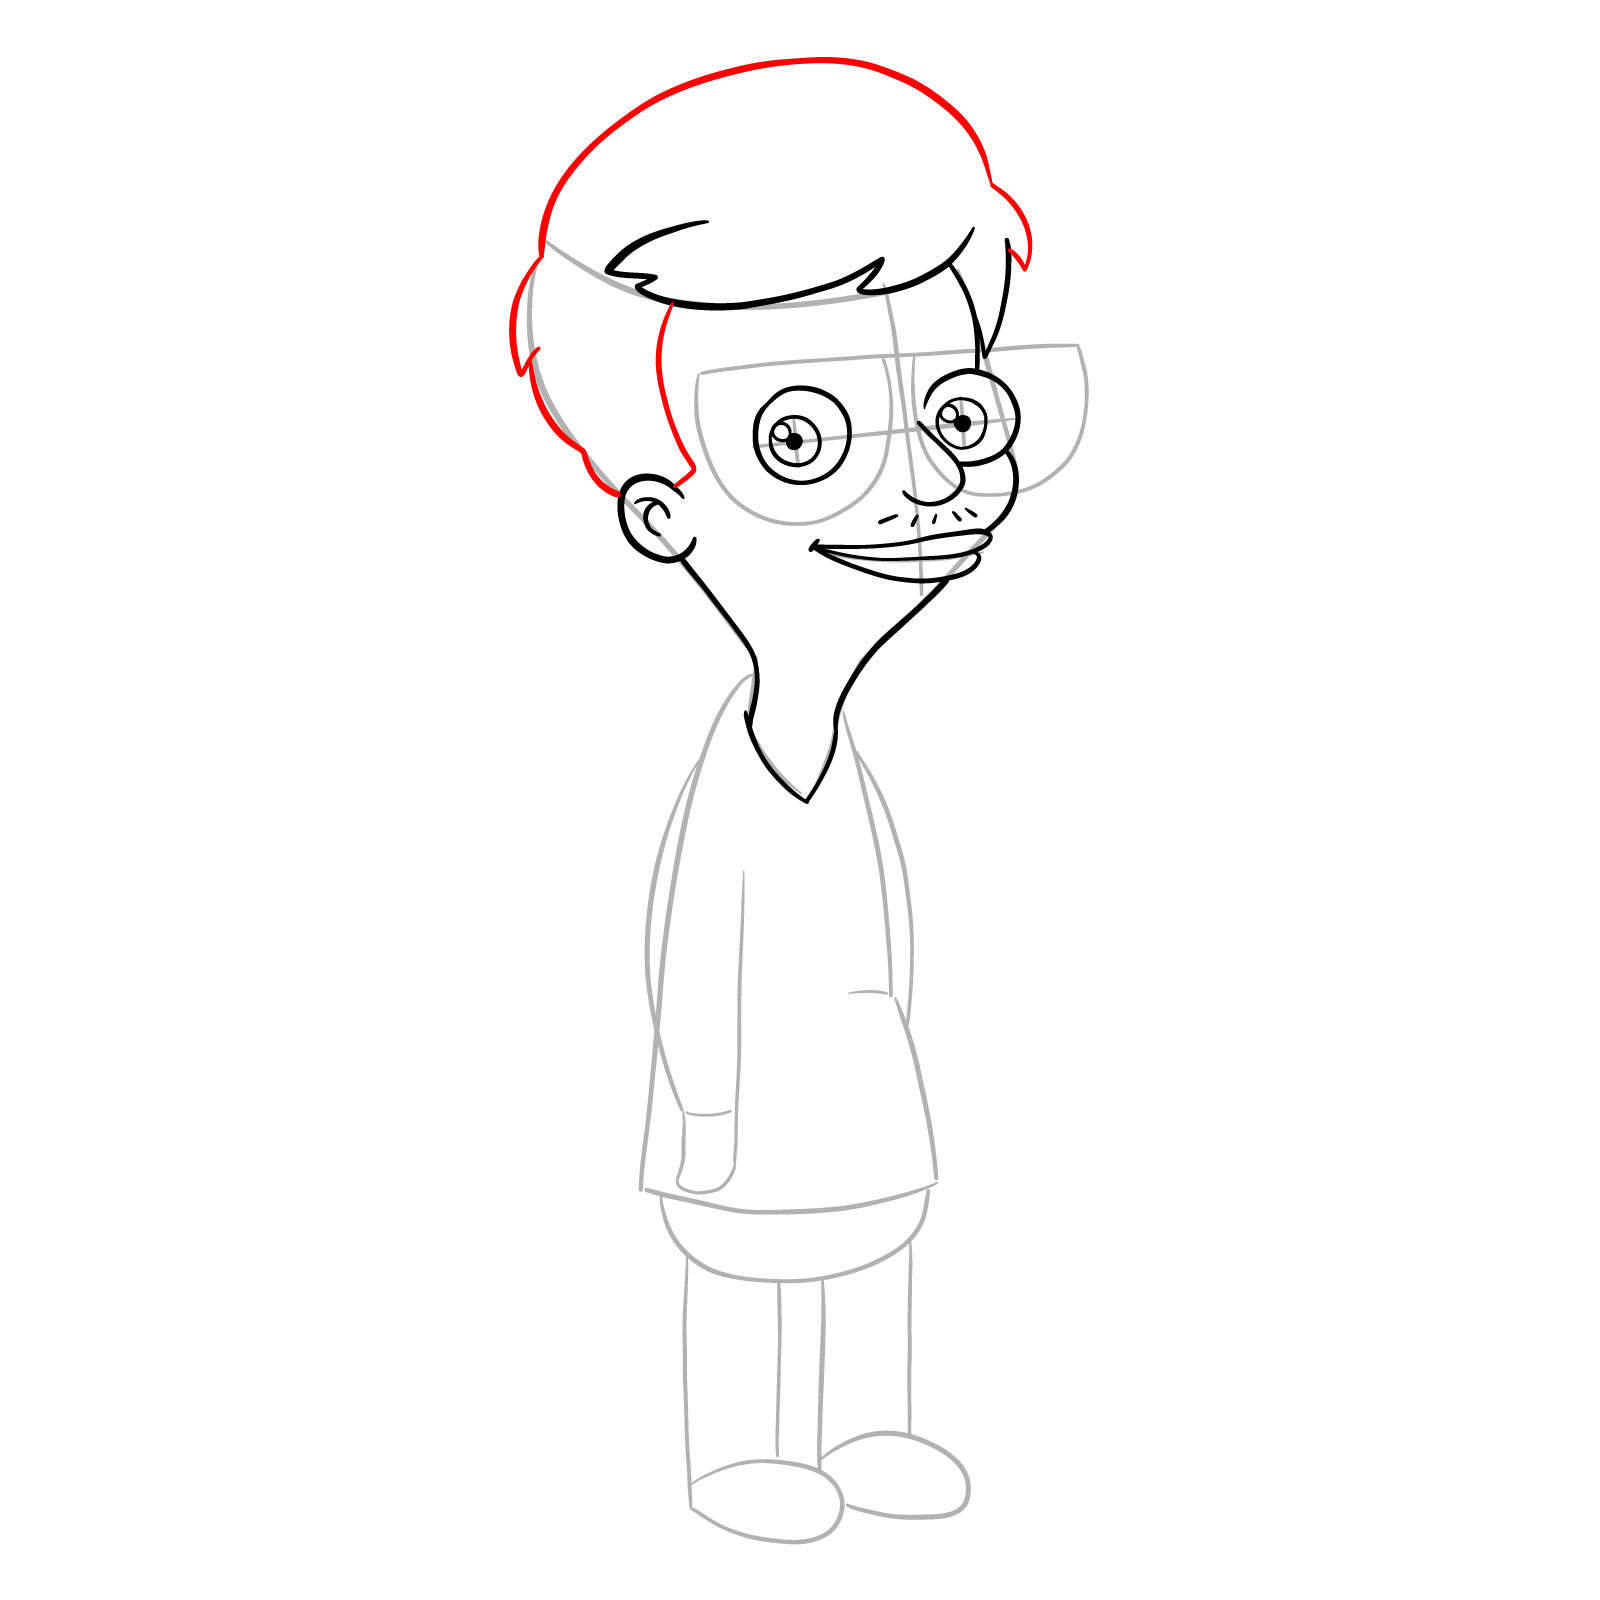 How to draw Andrew from Big Mouth - step 11